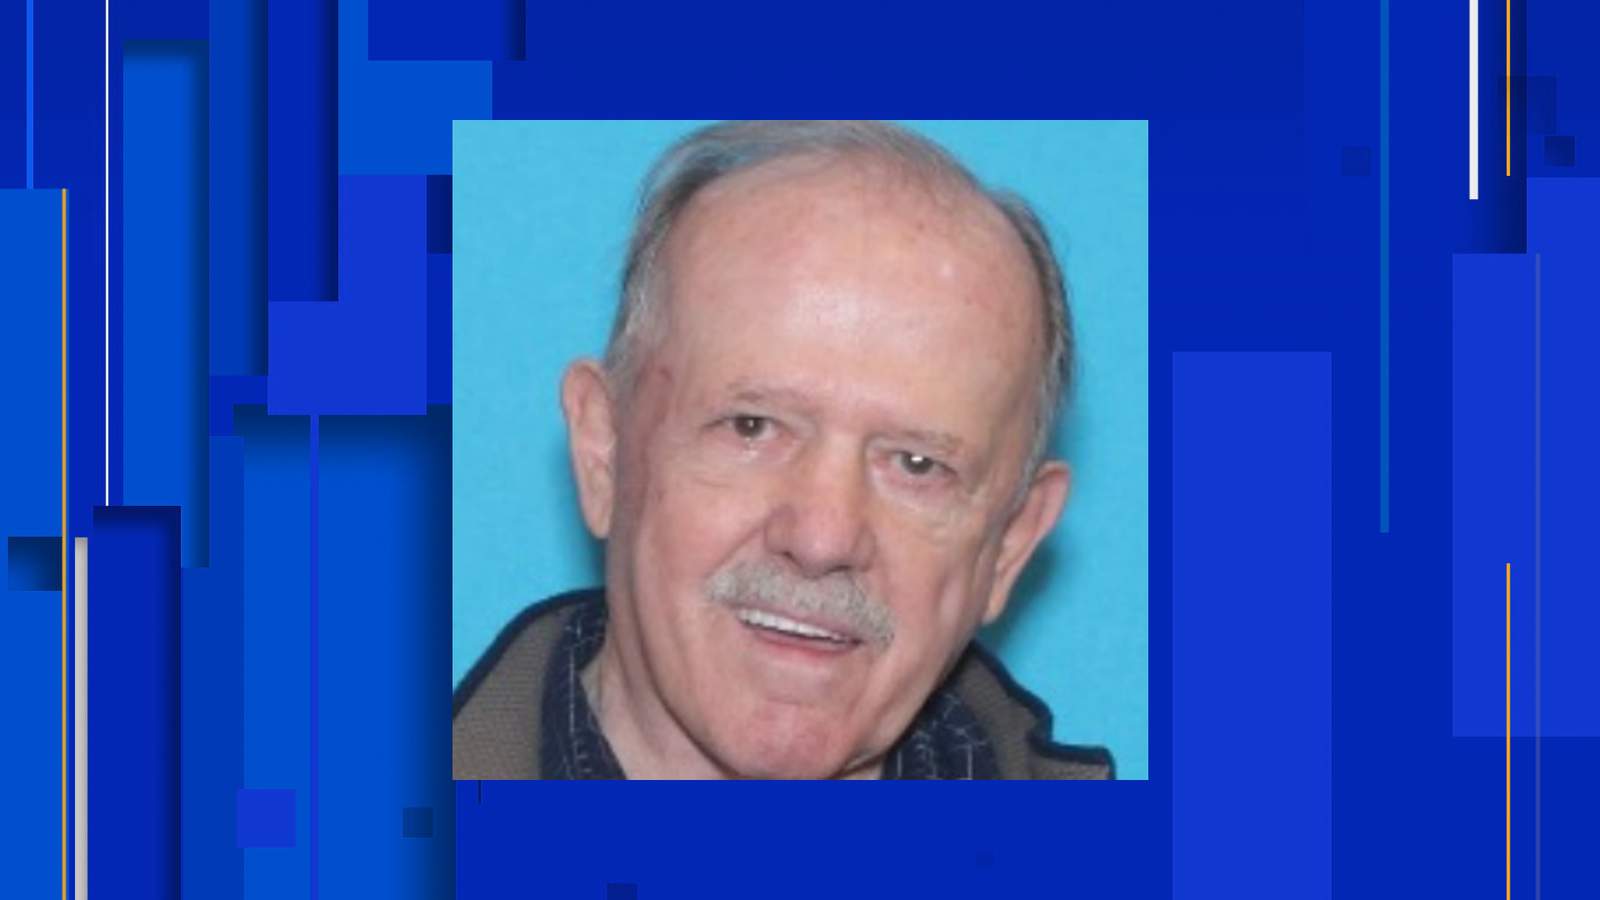 Silver Alert issued for missing 80-year-old man